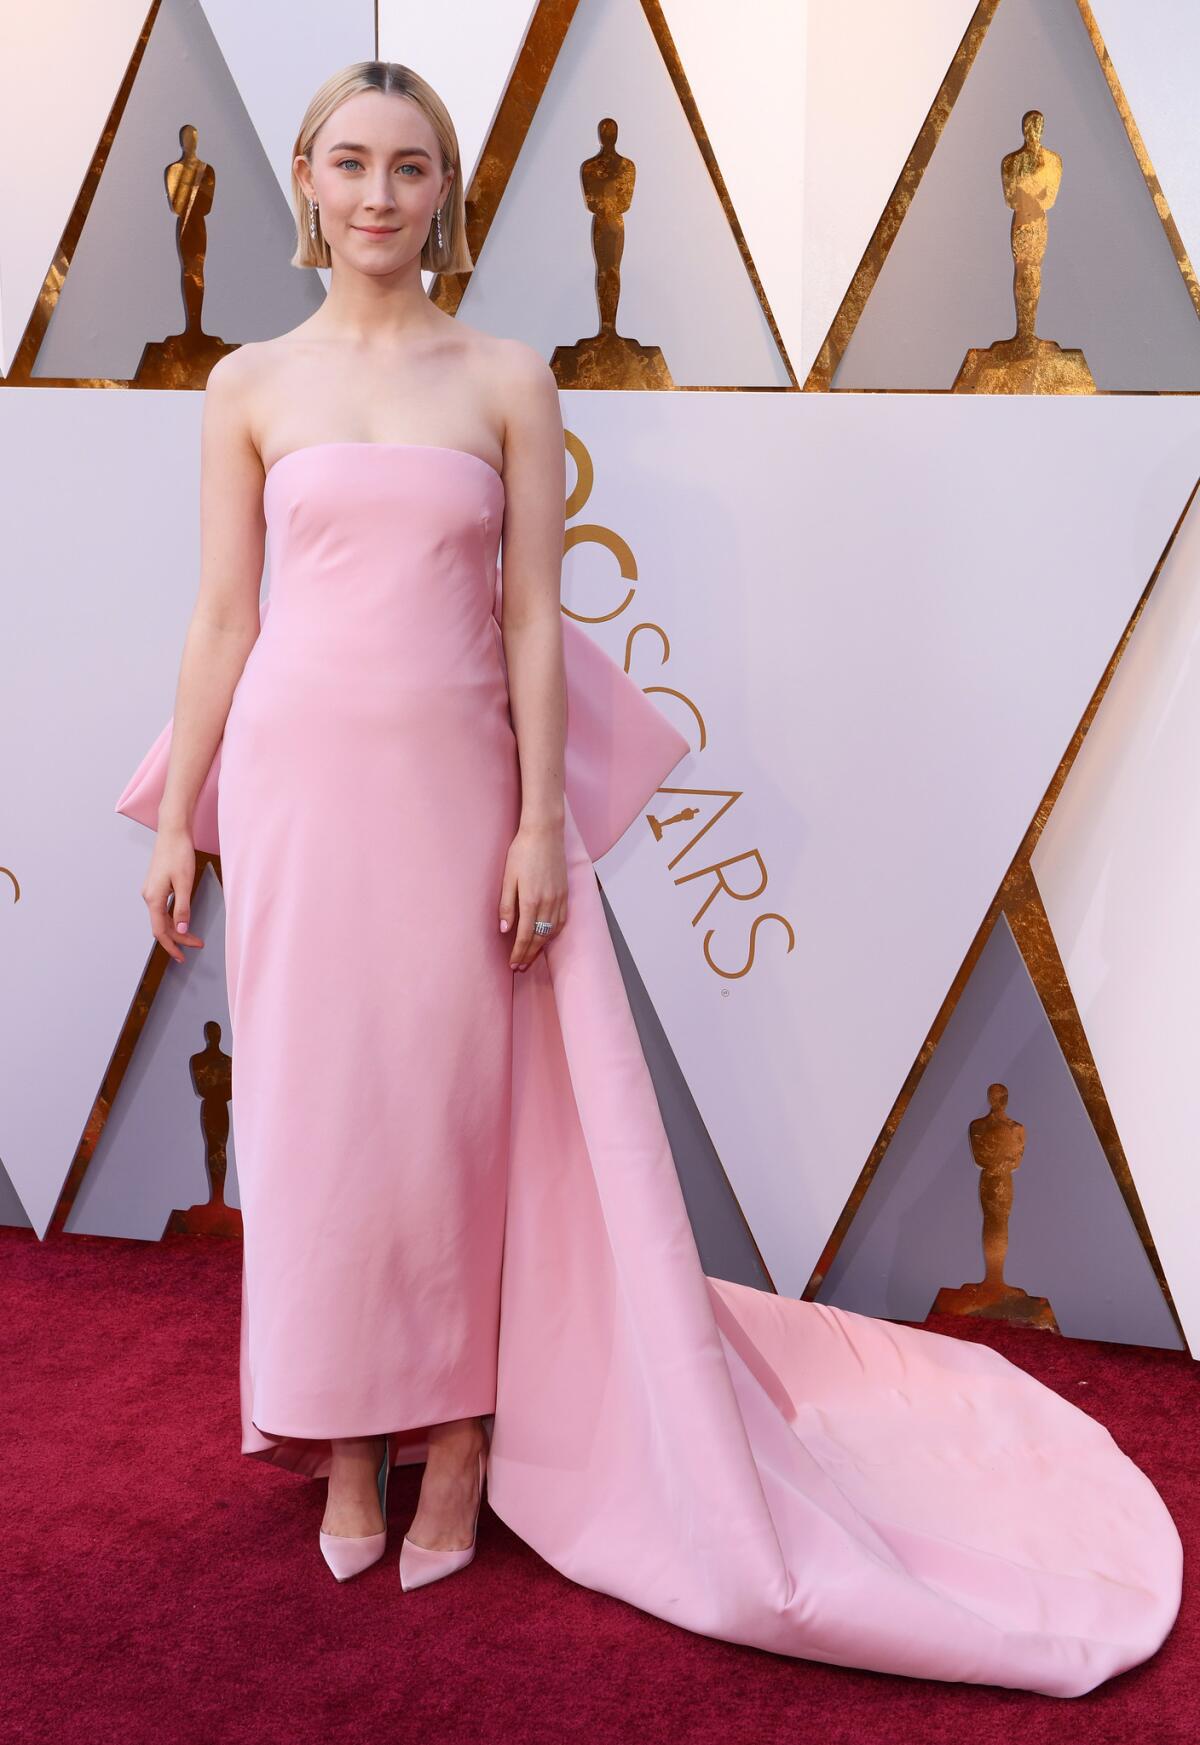 Saoirse Ronan in Calvin Klein By Appointment at the 2018 Oscars.